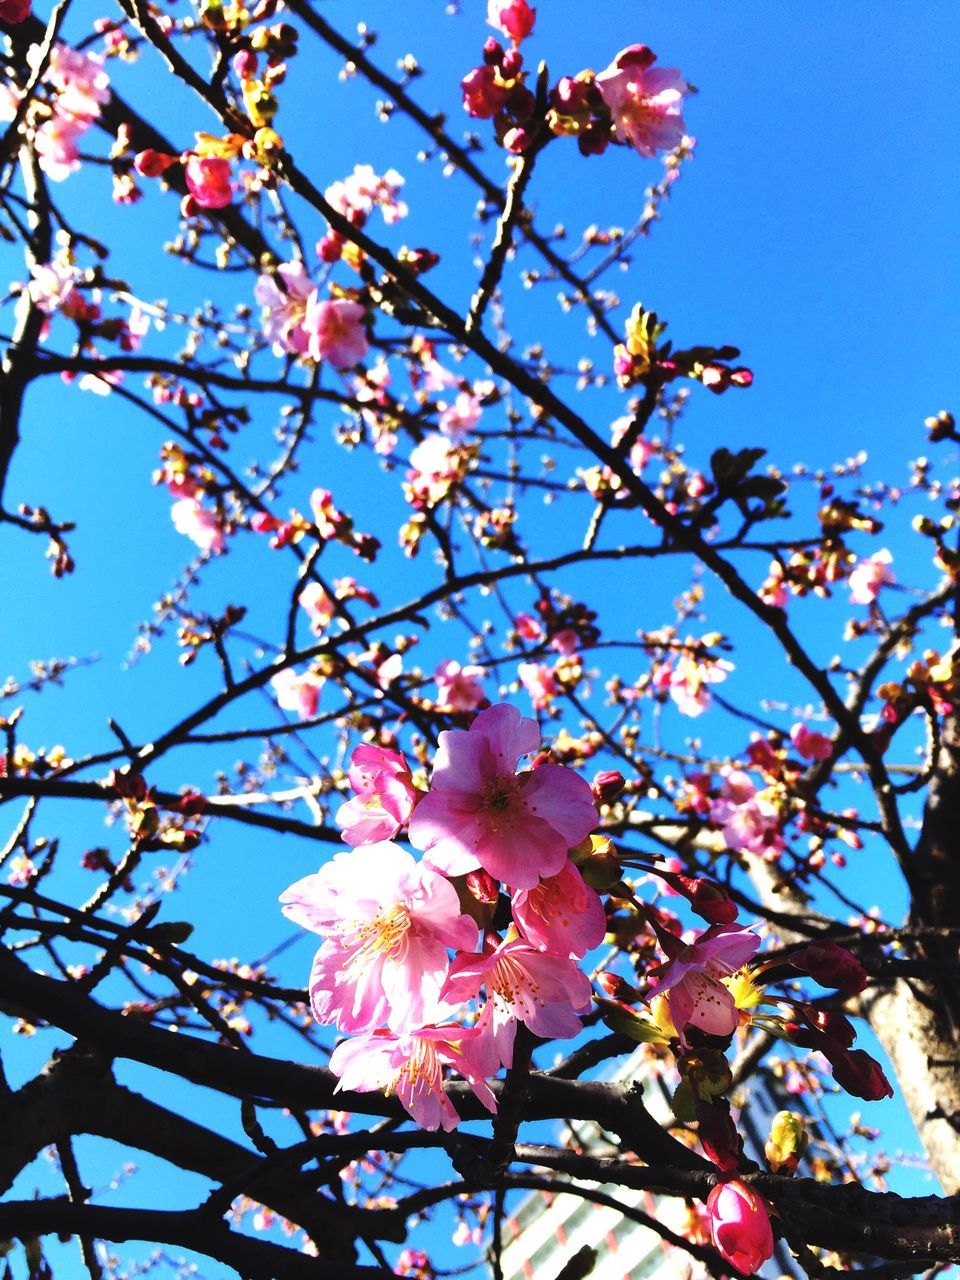 flower, freshness, branch, low angle view, fragility, growth, tree, clear sky, blossom, beauty in nature, pink color, nature, blooming, petal, in bloom, cherry blossom, cherry tree, springtime, blue, sky